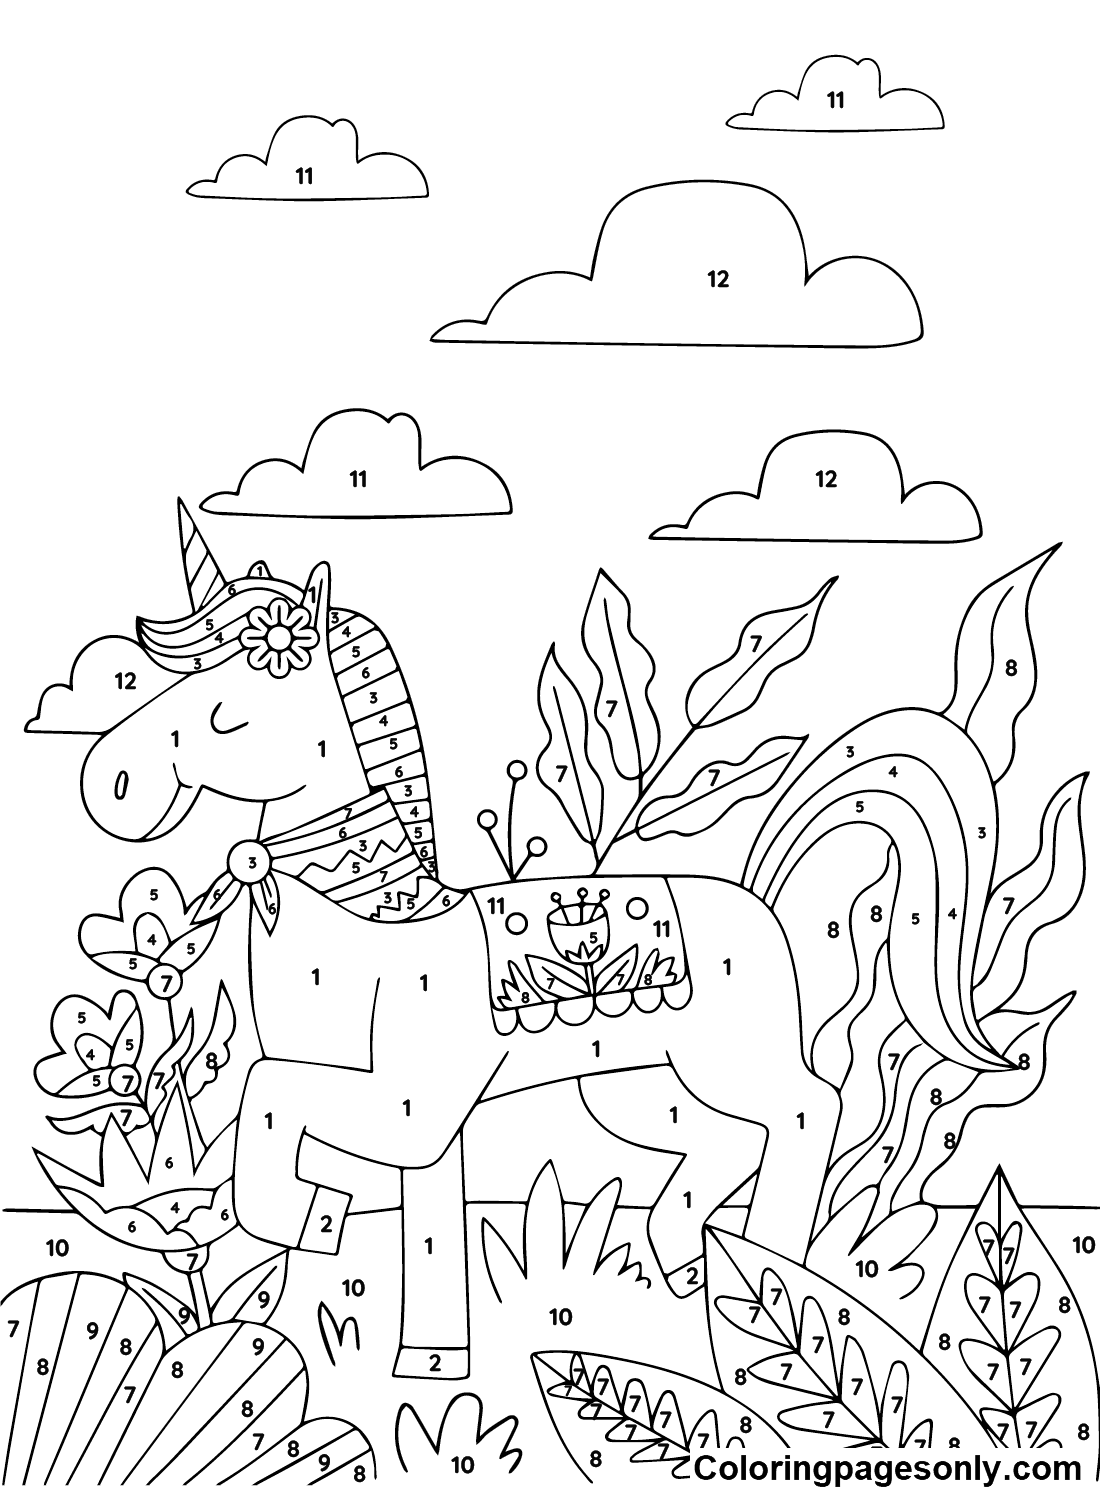 Unicorn Color By Number Images Coloring Page